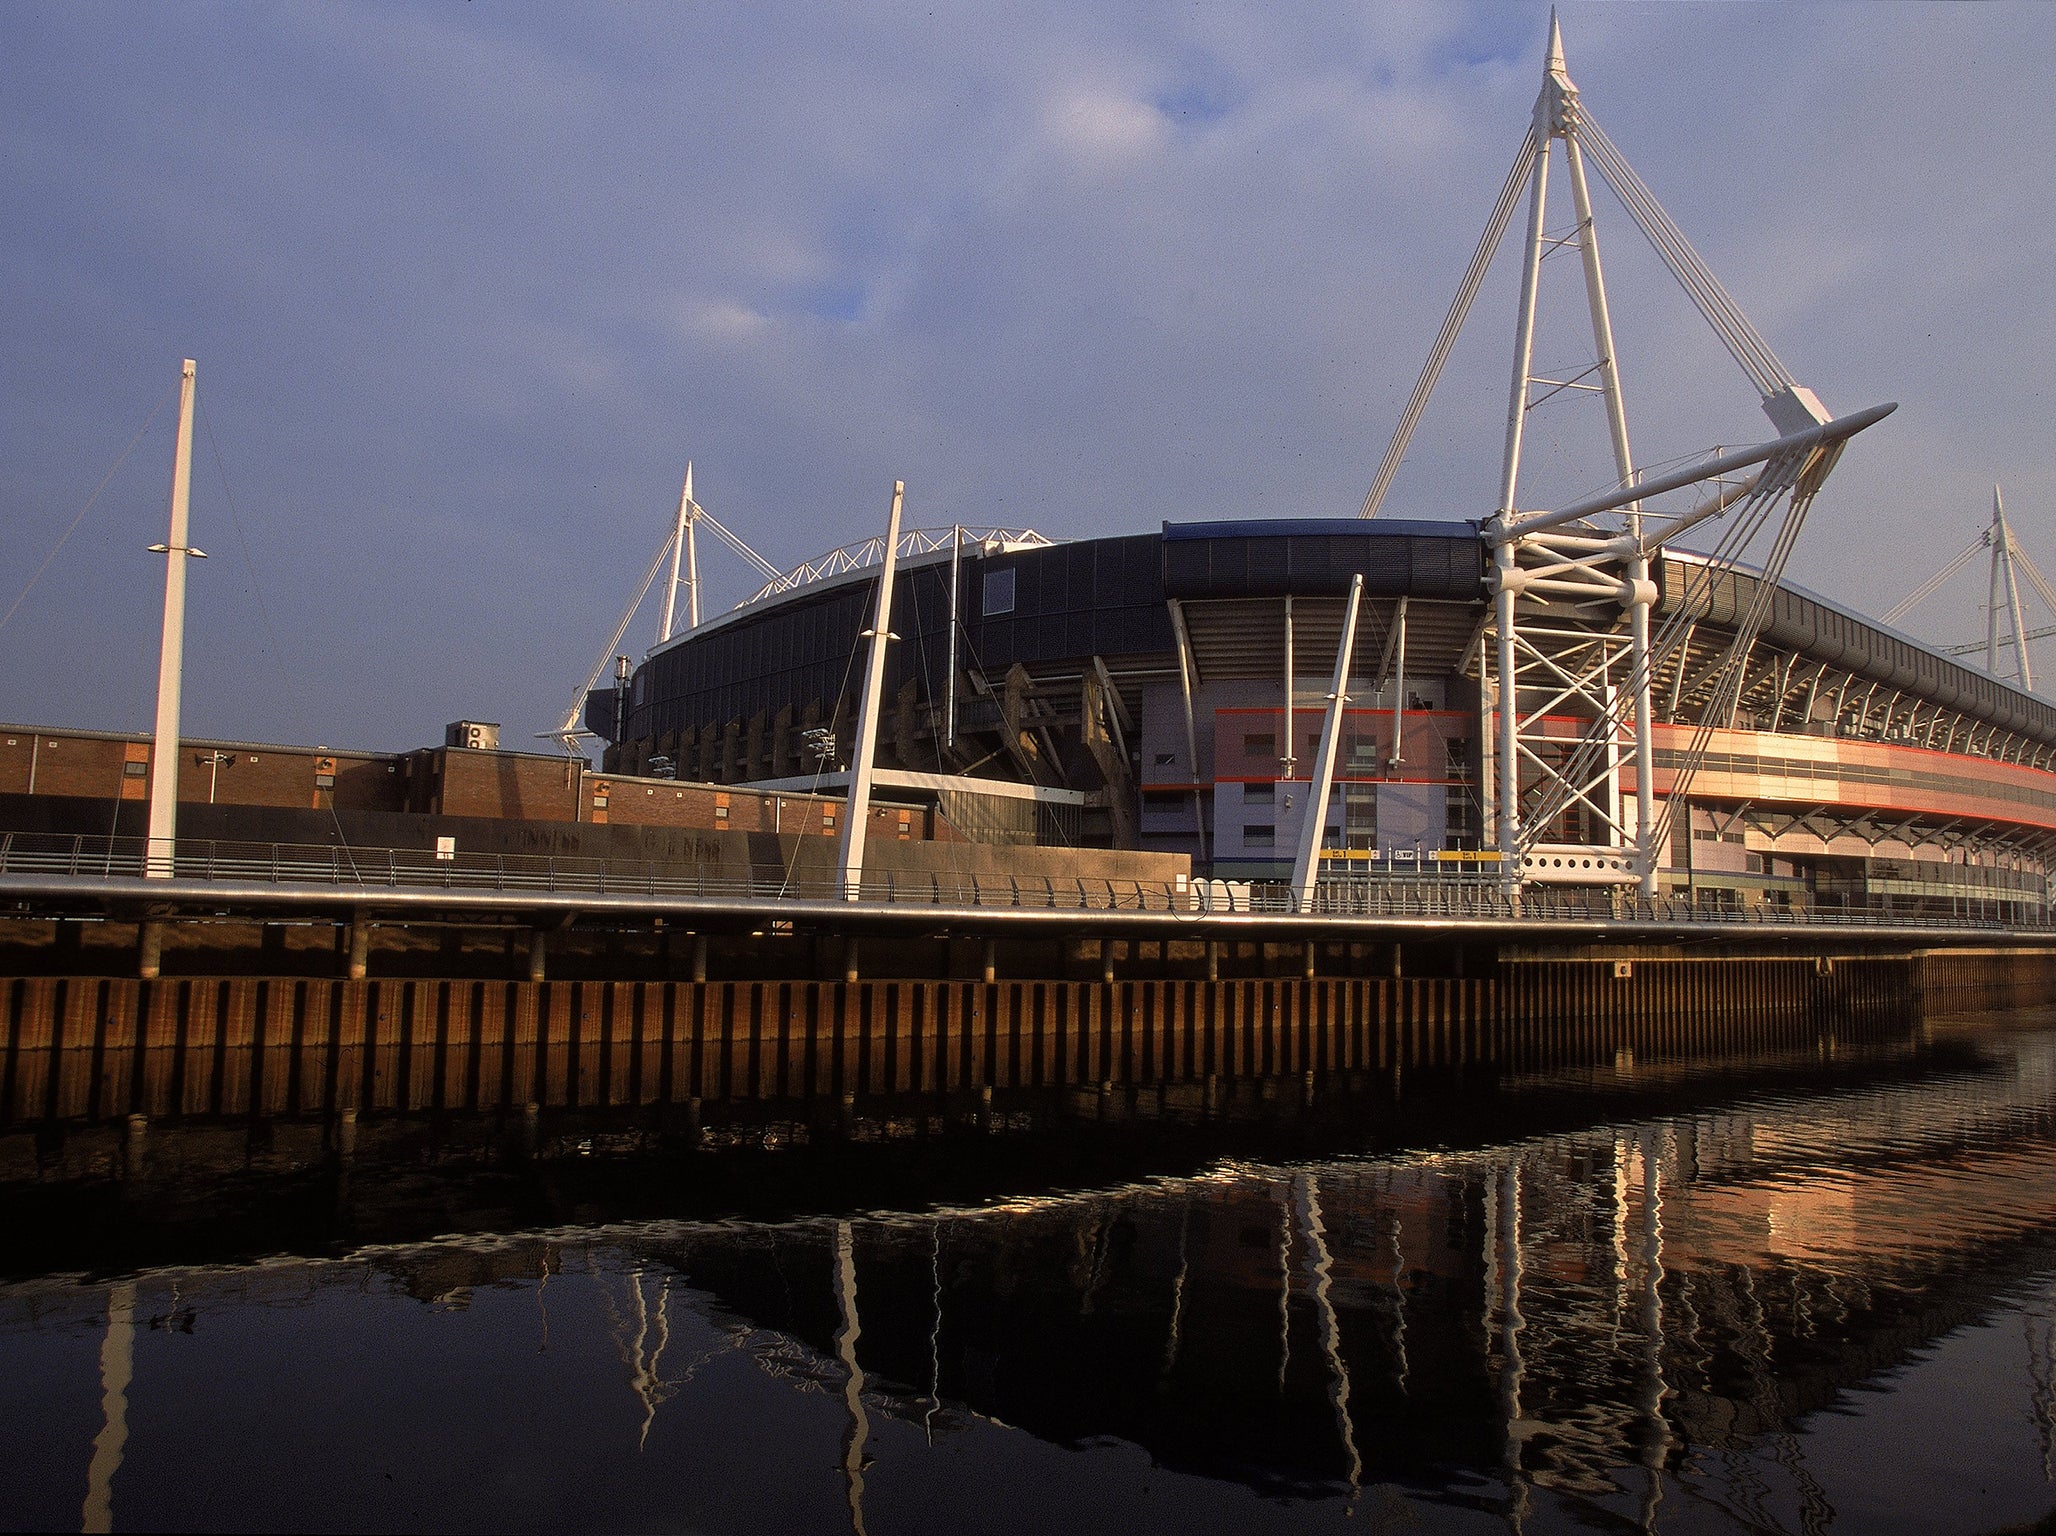 The Principality Stadium will stage the contest